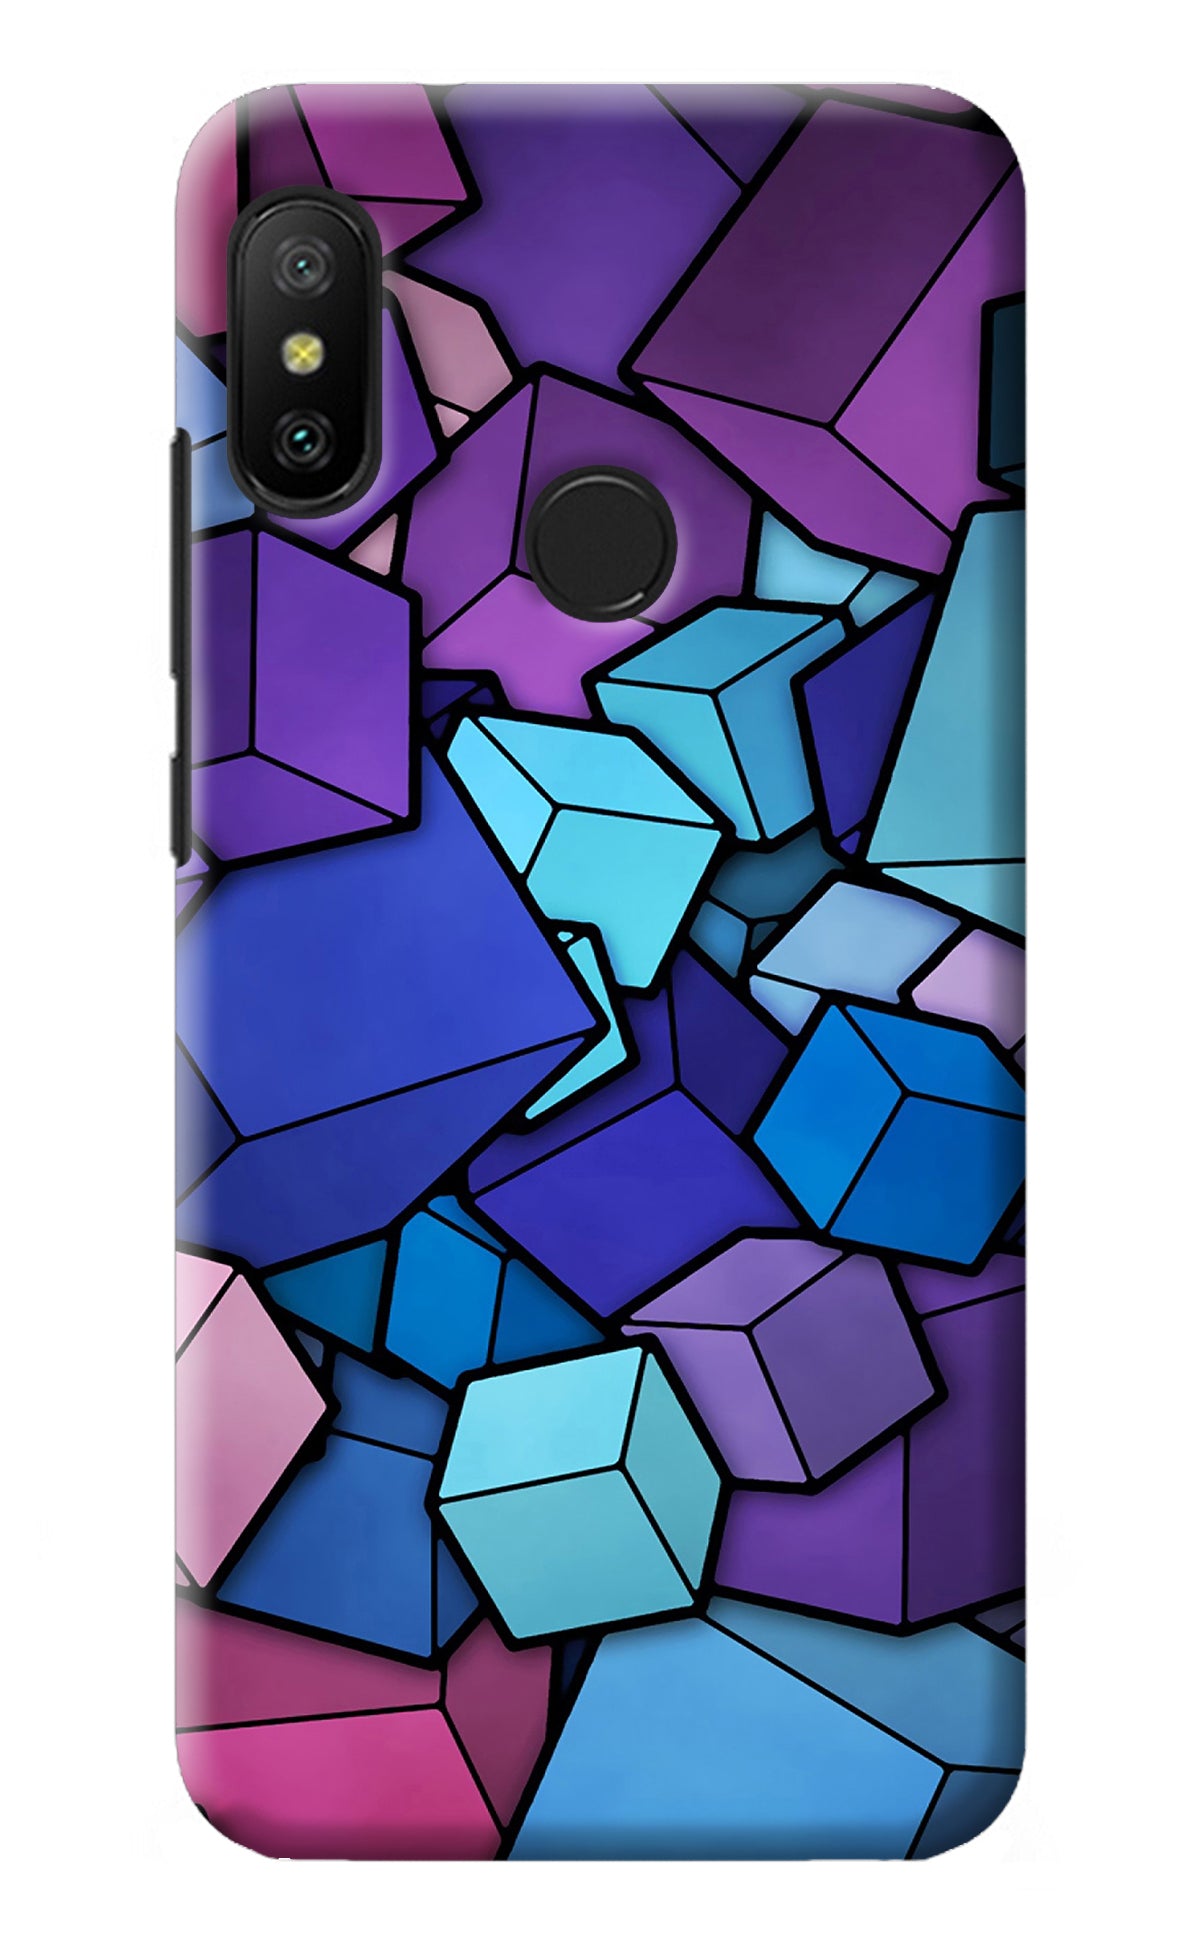 Cubic Abstract Redmi 6 Pro Back Cover